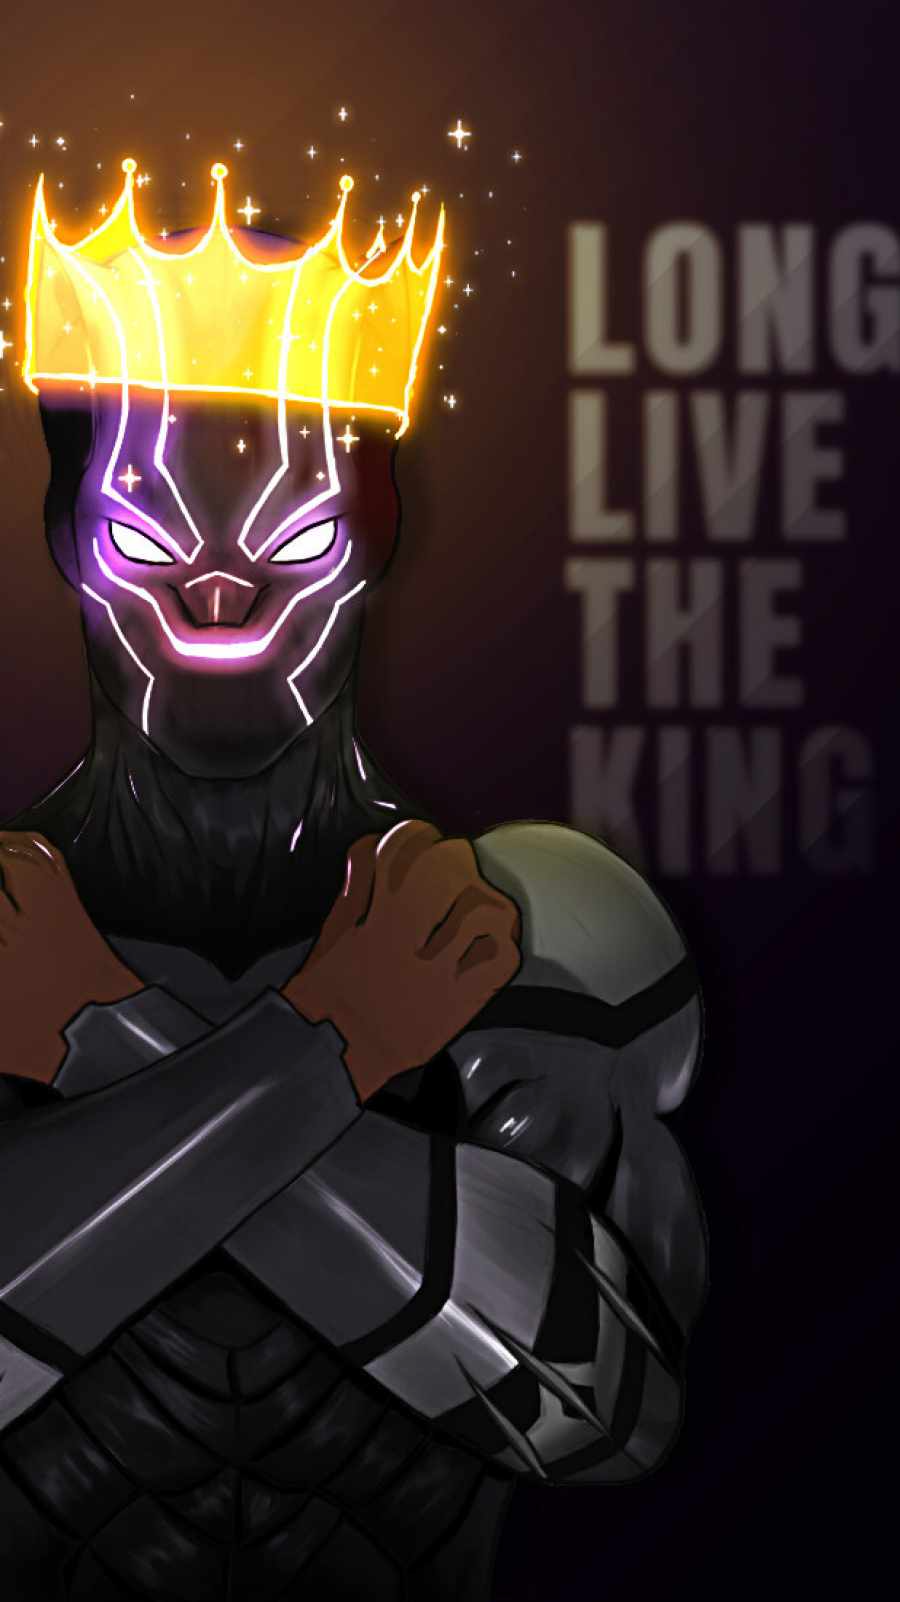 Long Live The King Black Panther IPhone Wallpaper HD  IPhone Wallpapers